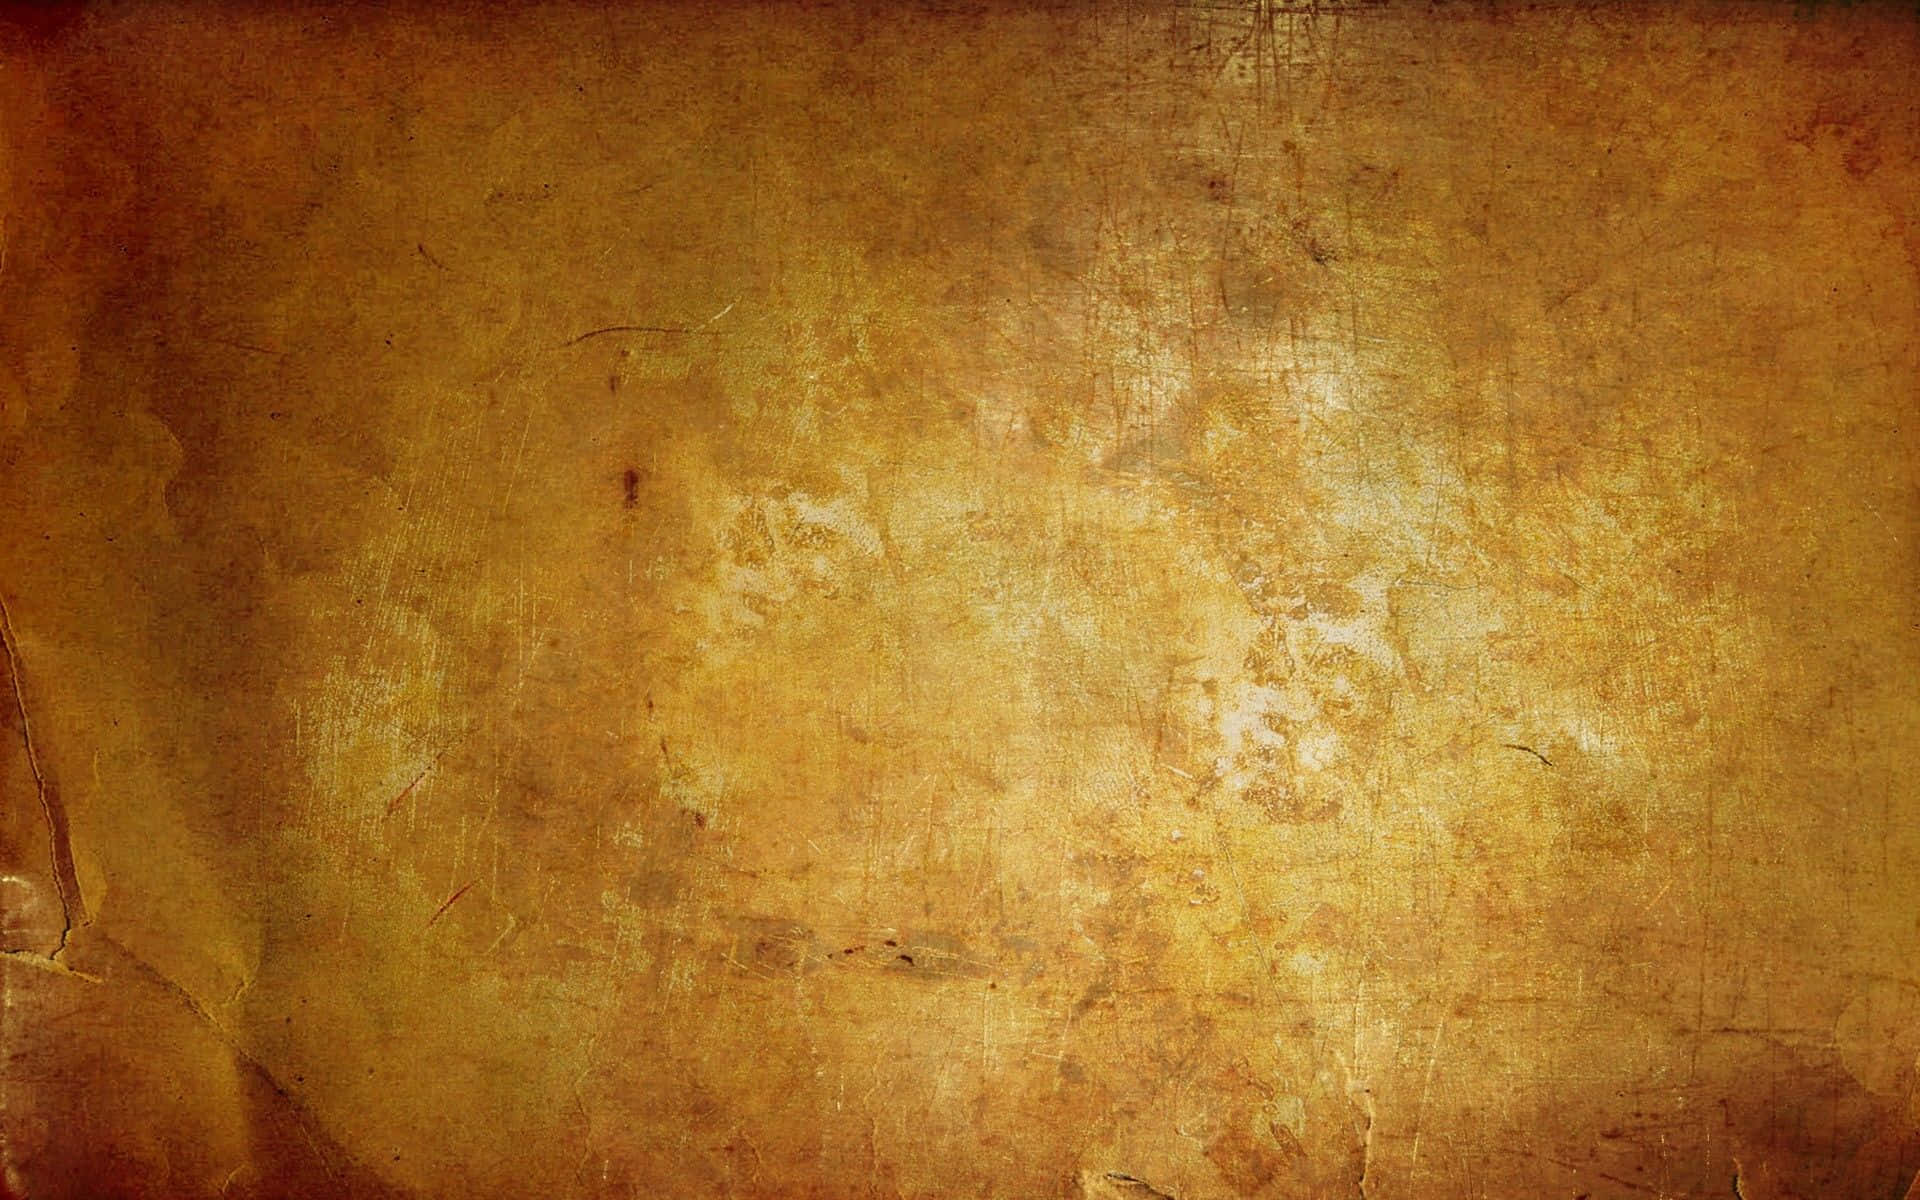 A vibrantly textured yellow grunge background Wallpaper